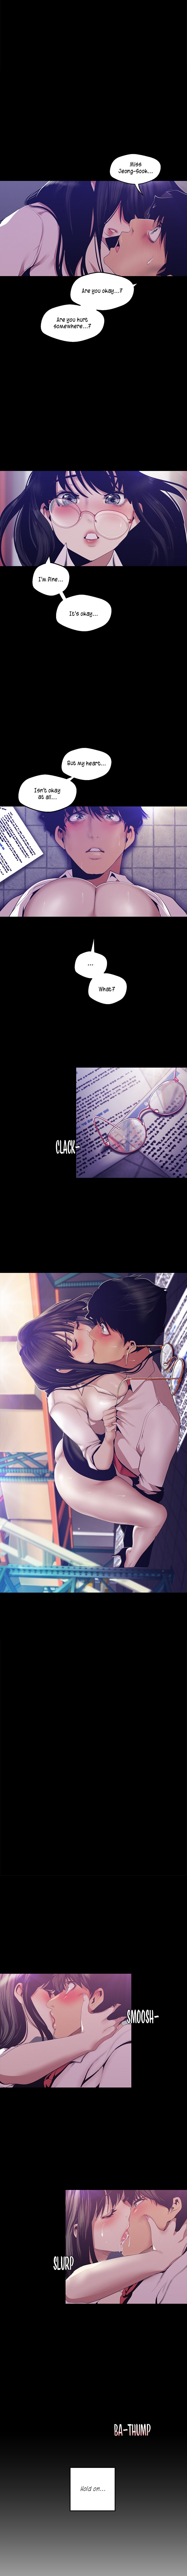 Panel Image 1 for chapter 90 of manhwa A Wonderful New World on read.oppai.stream